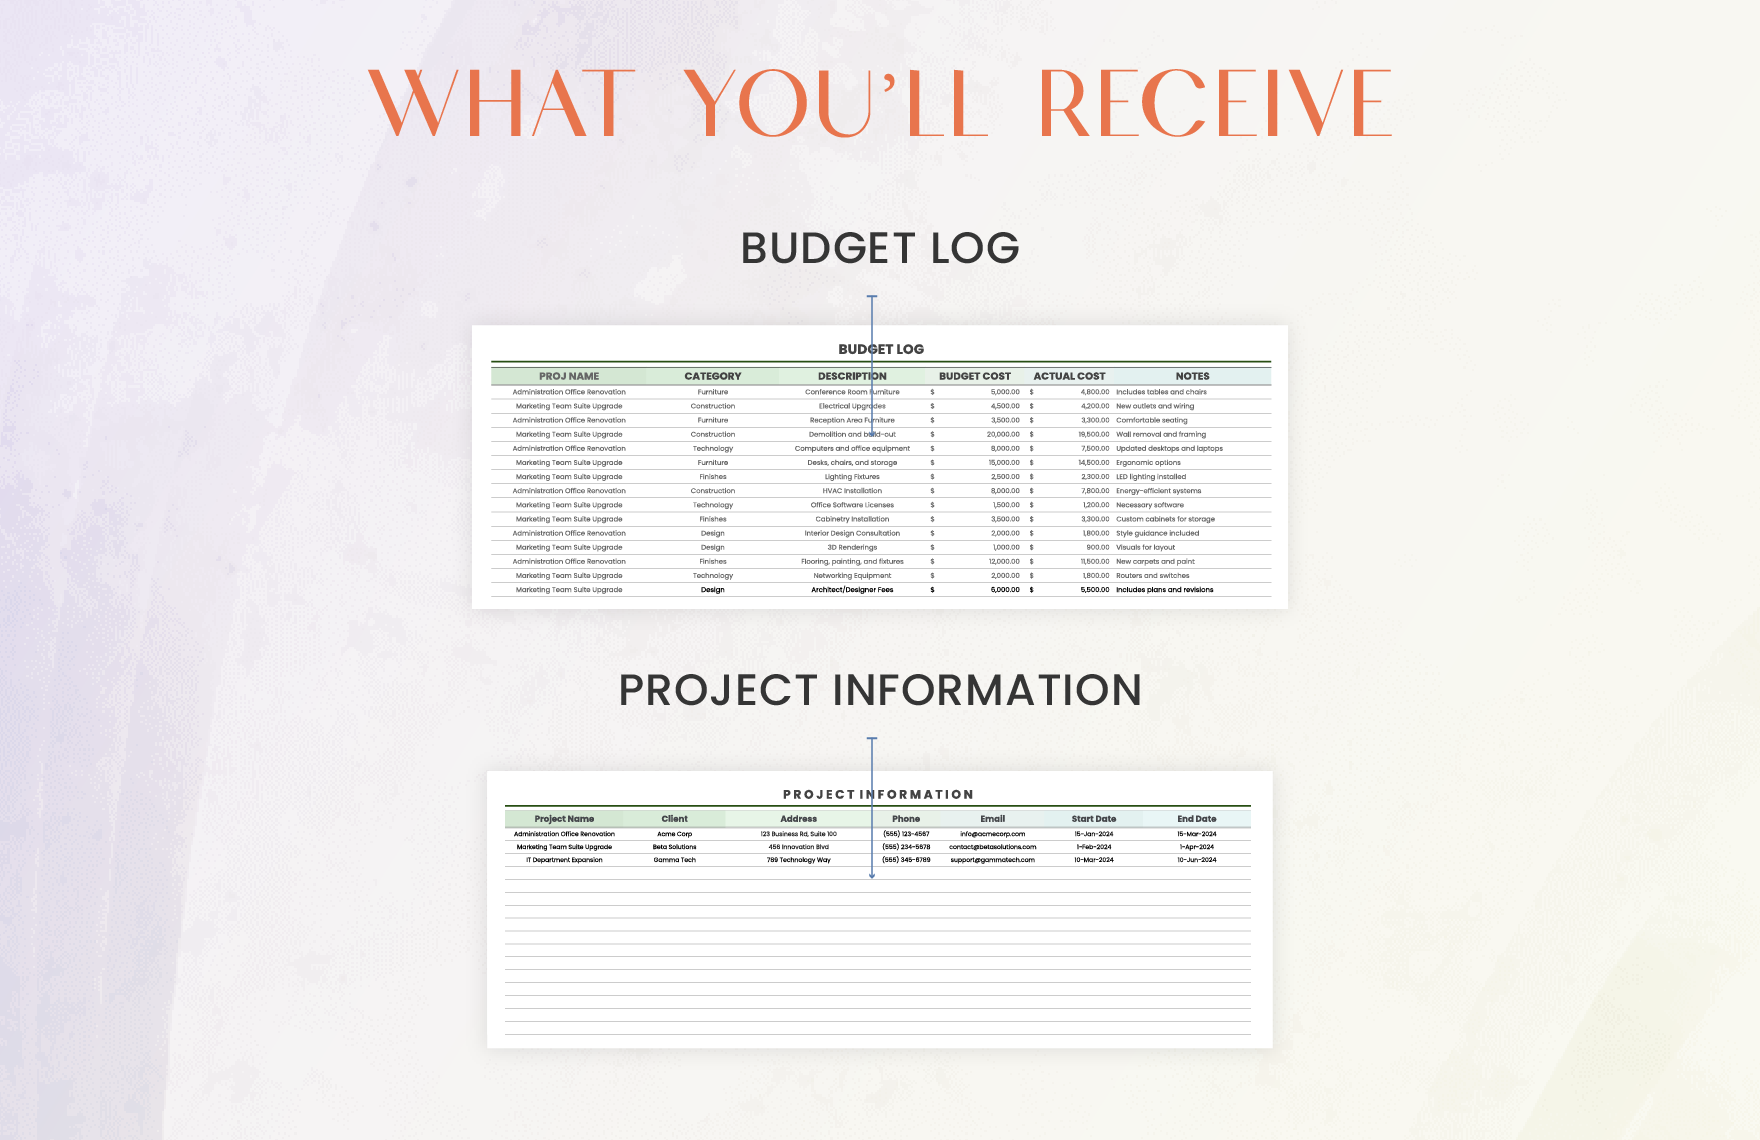 Administration Office Renovation Budget Planner Template